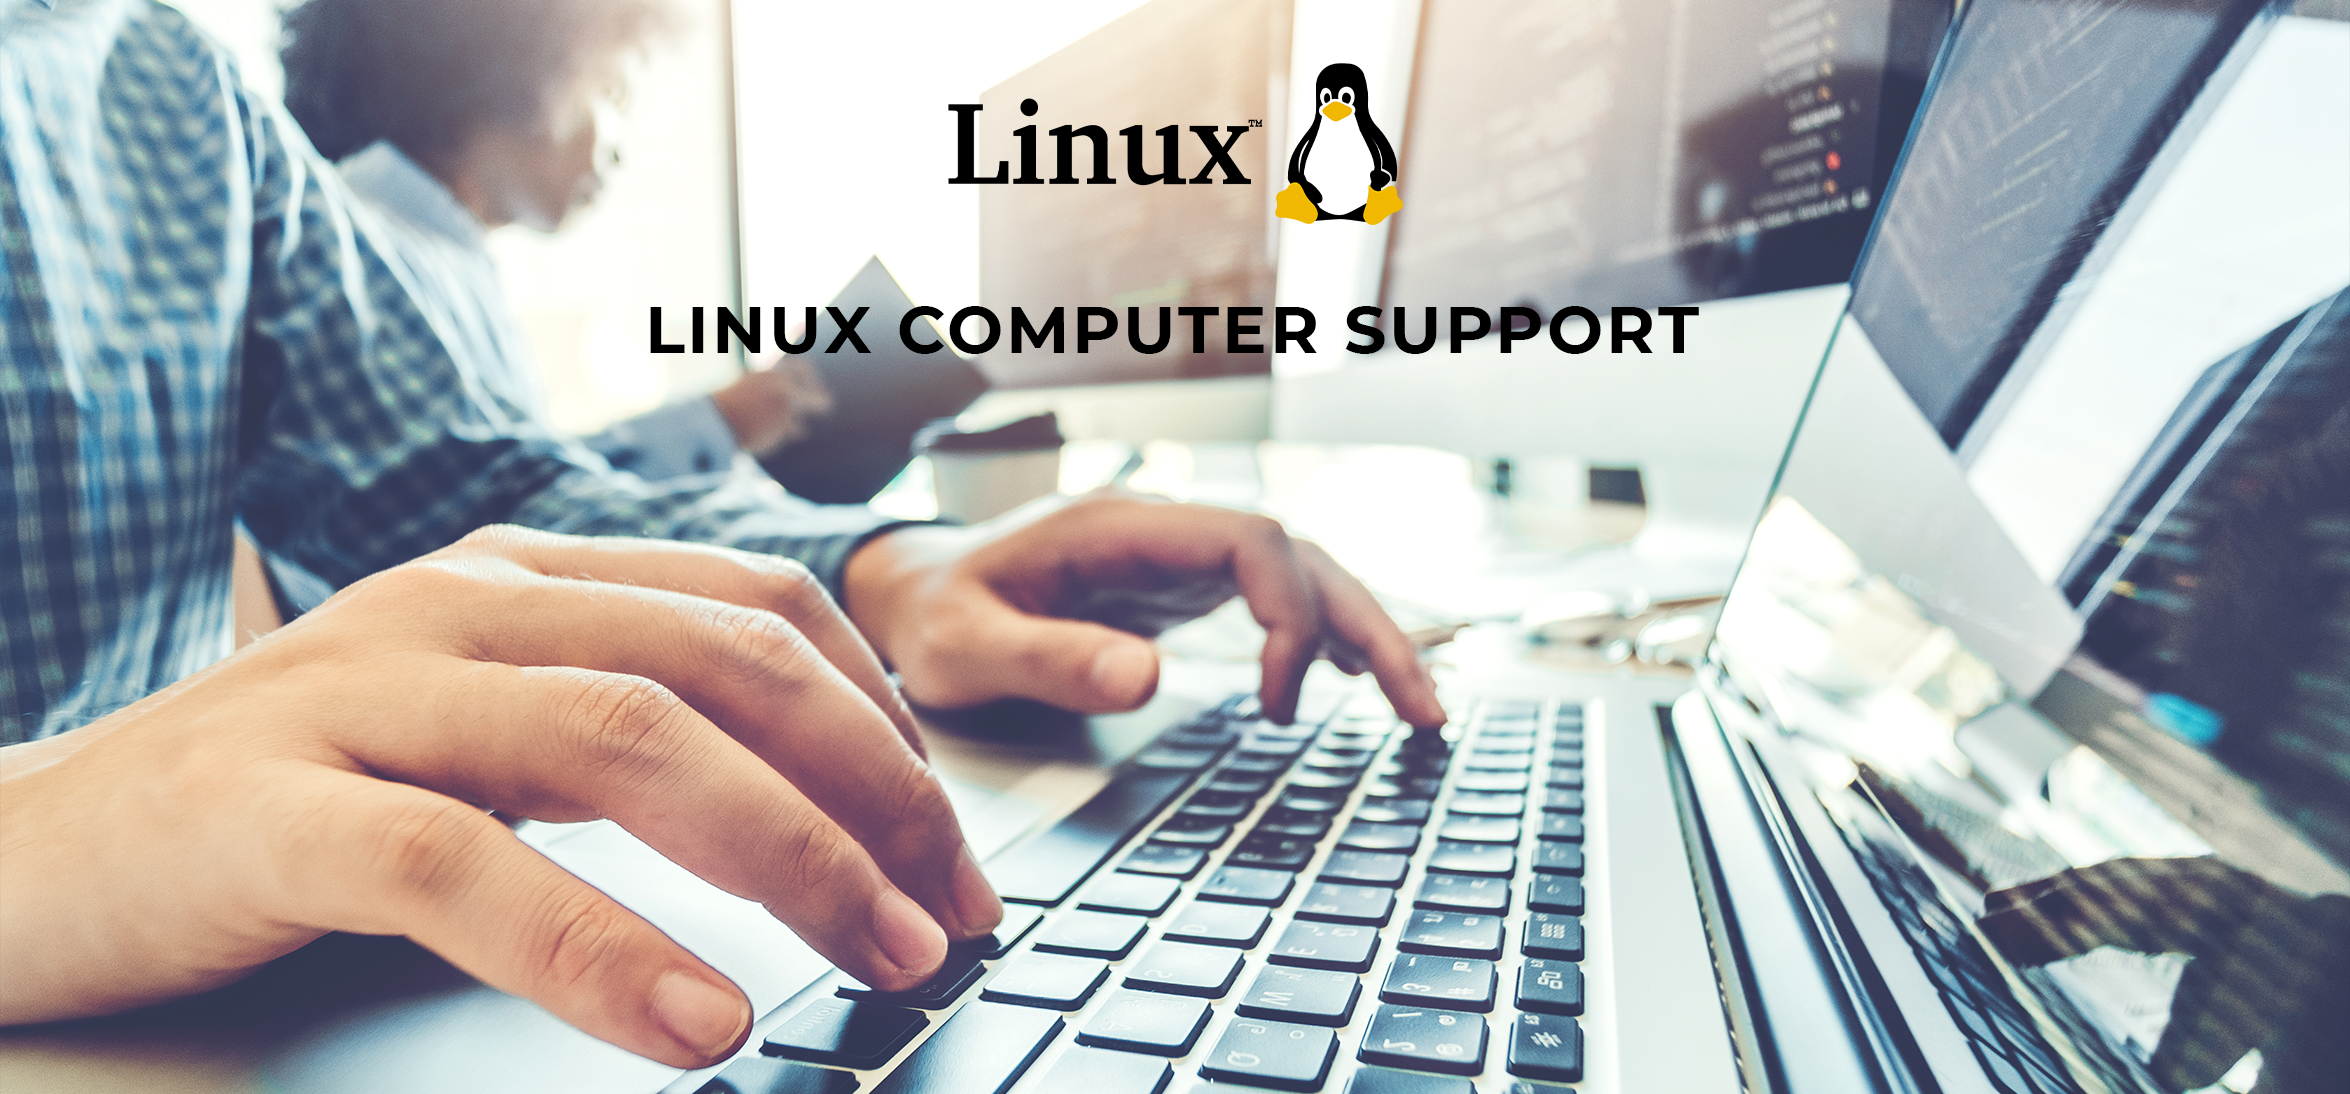 Support for Linux Servers in Lakeside CA, 92040